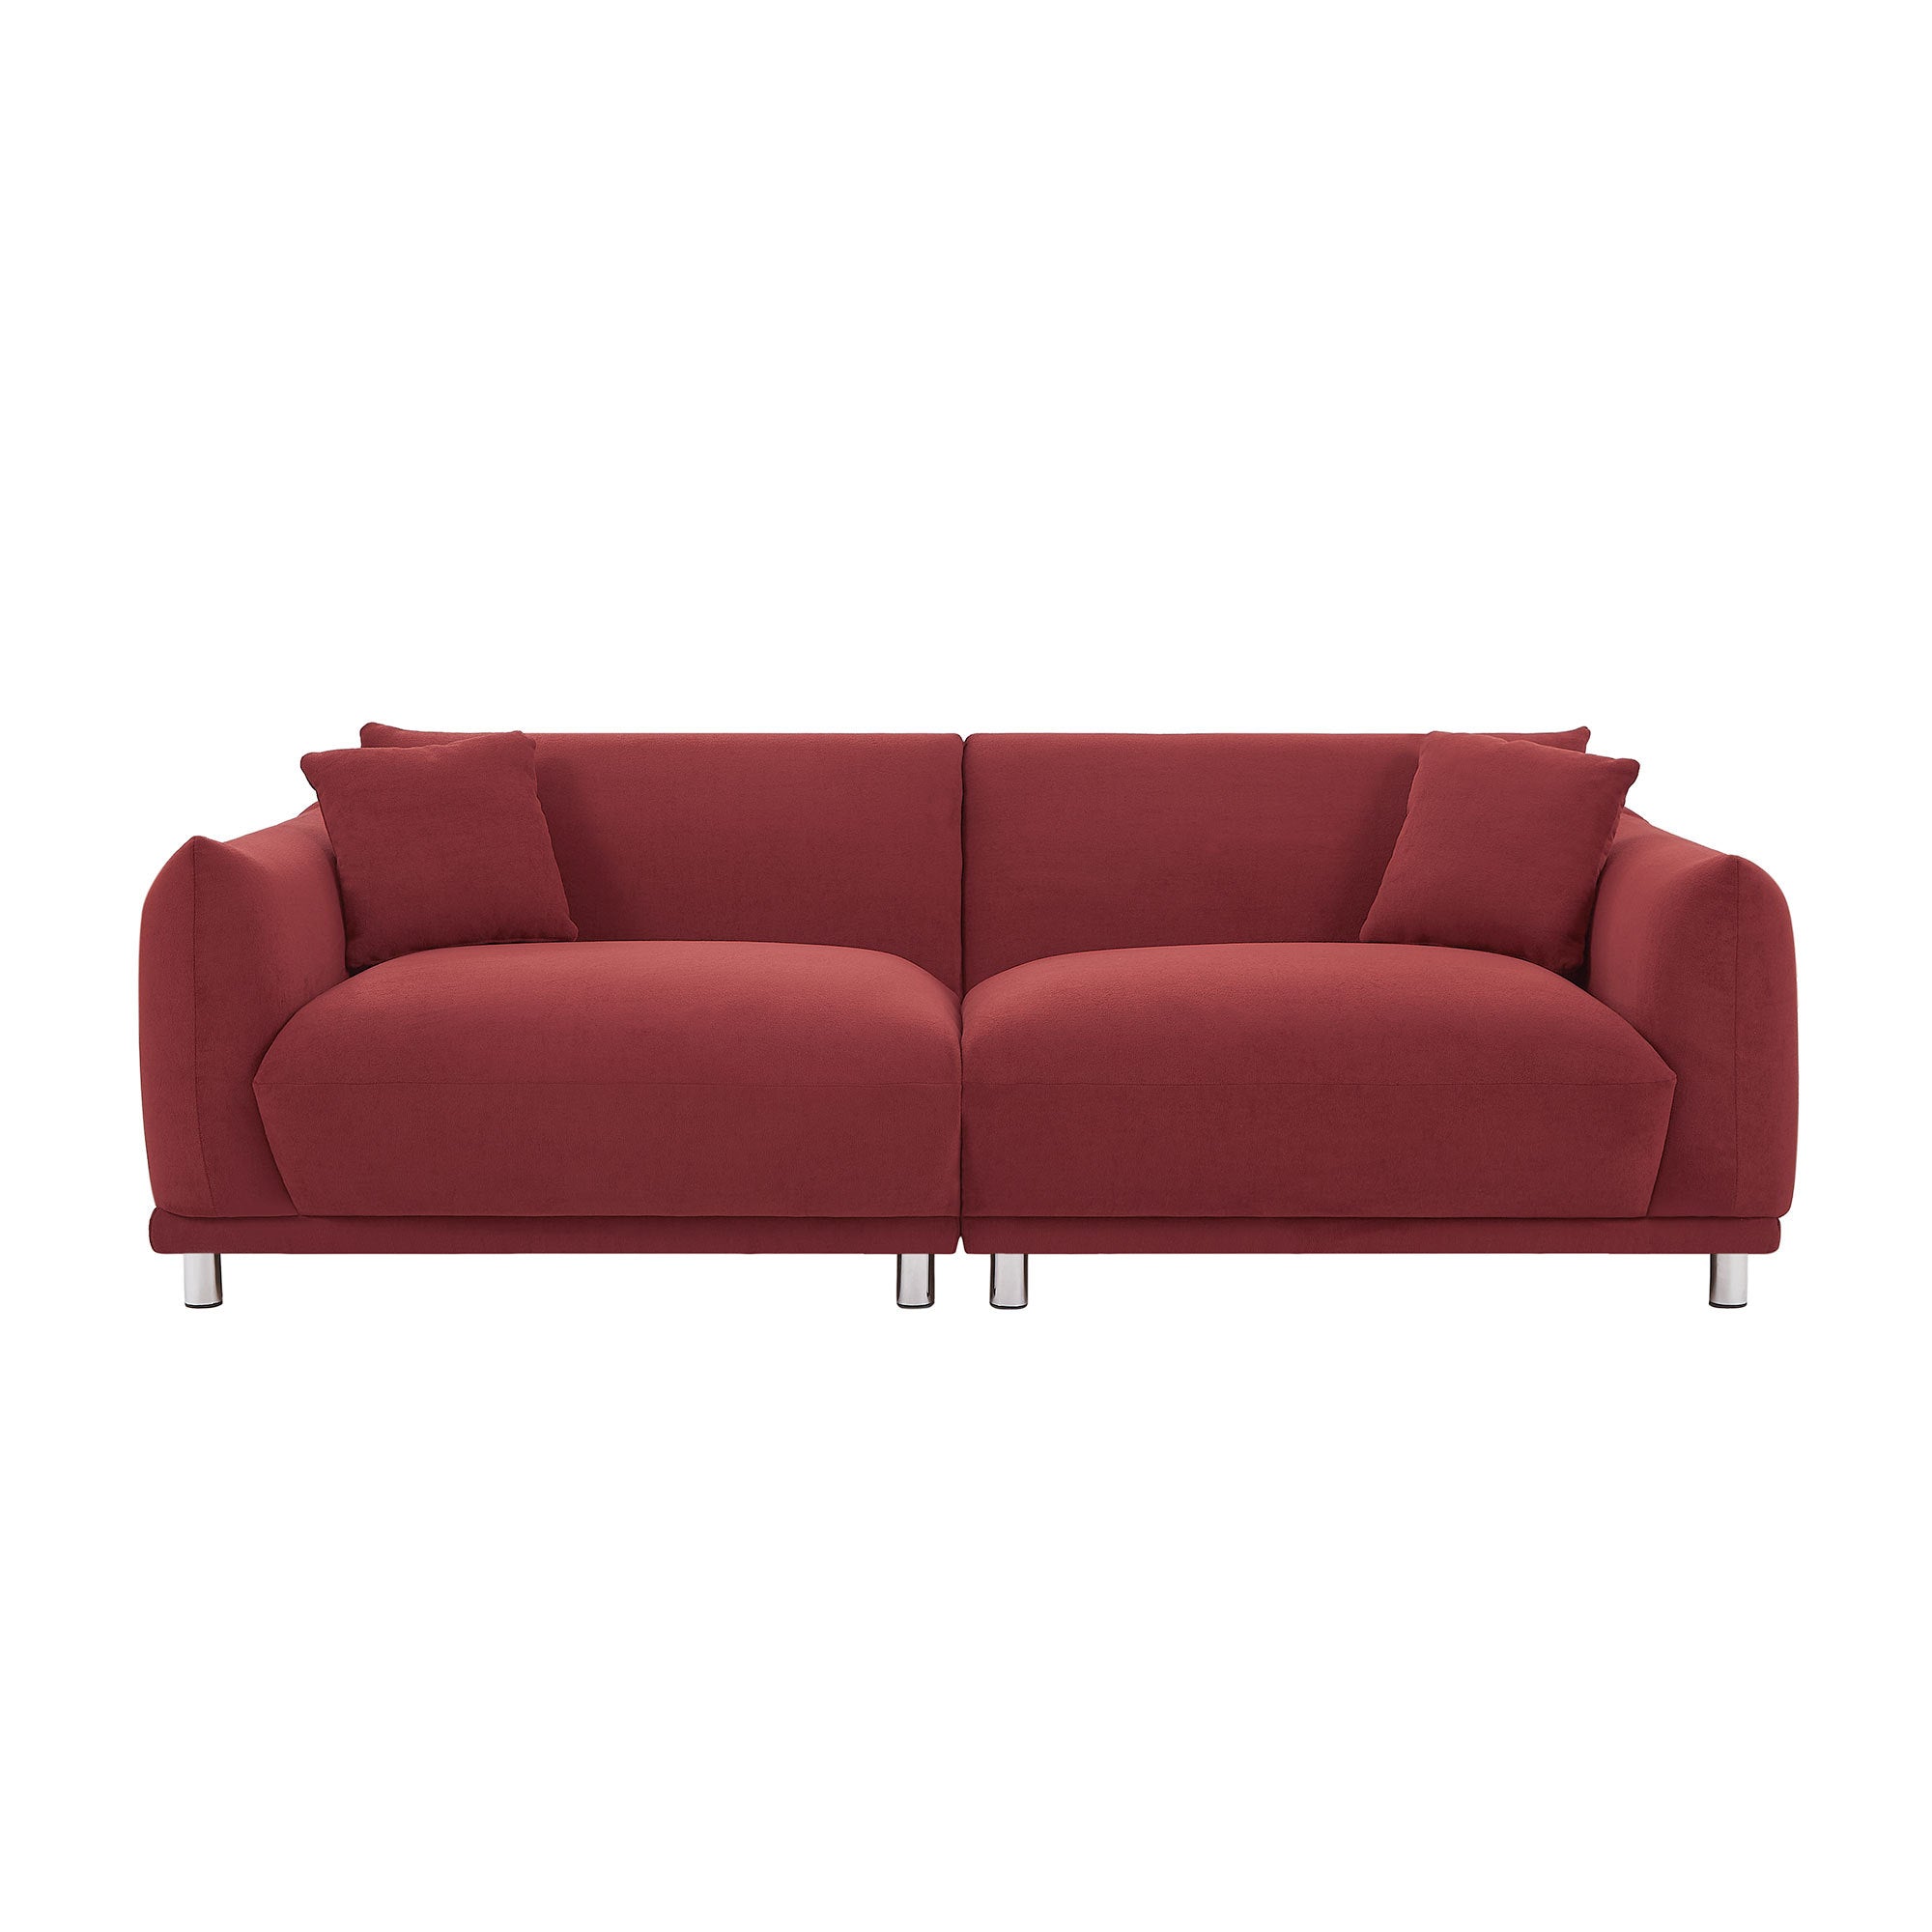 🆓🚛 Loveseat Sofa Couch for Modern Living Room, 2 Seater Sofa for Small Detachable Sofa Cover Space Spring Cushion & Solid Wood Frame, Red